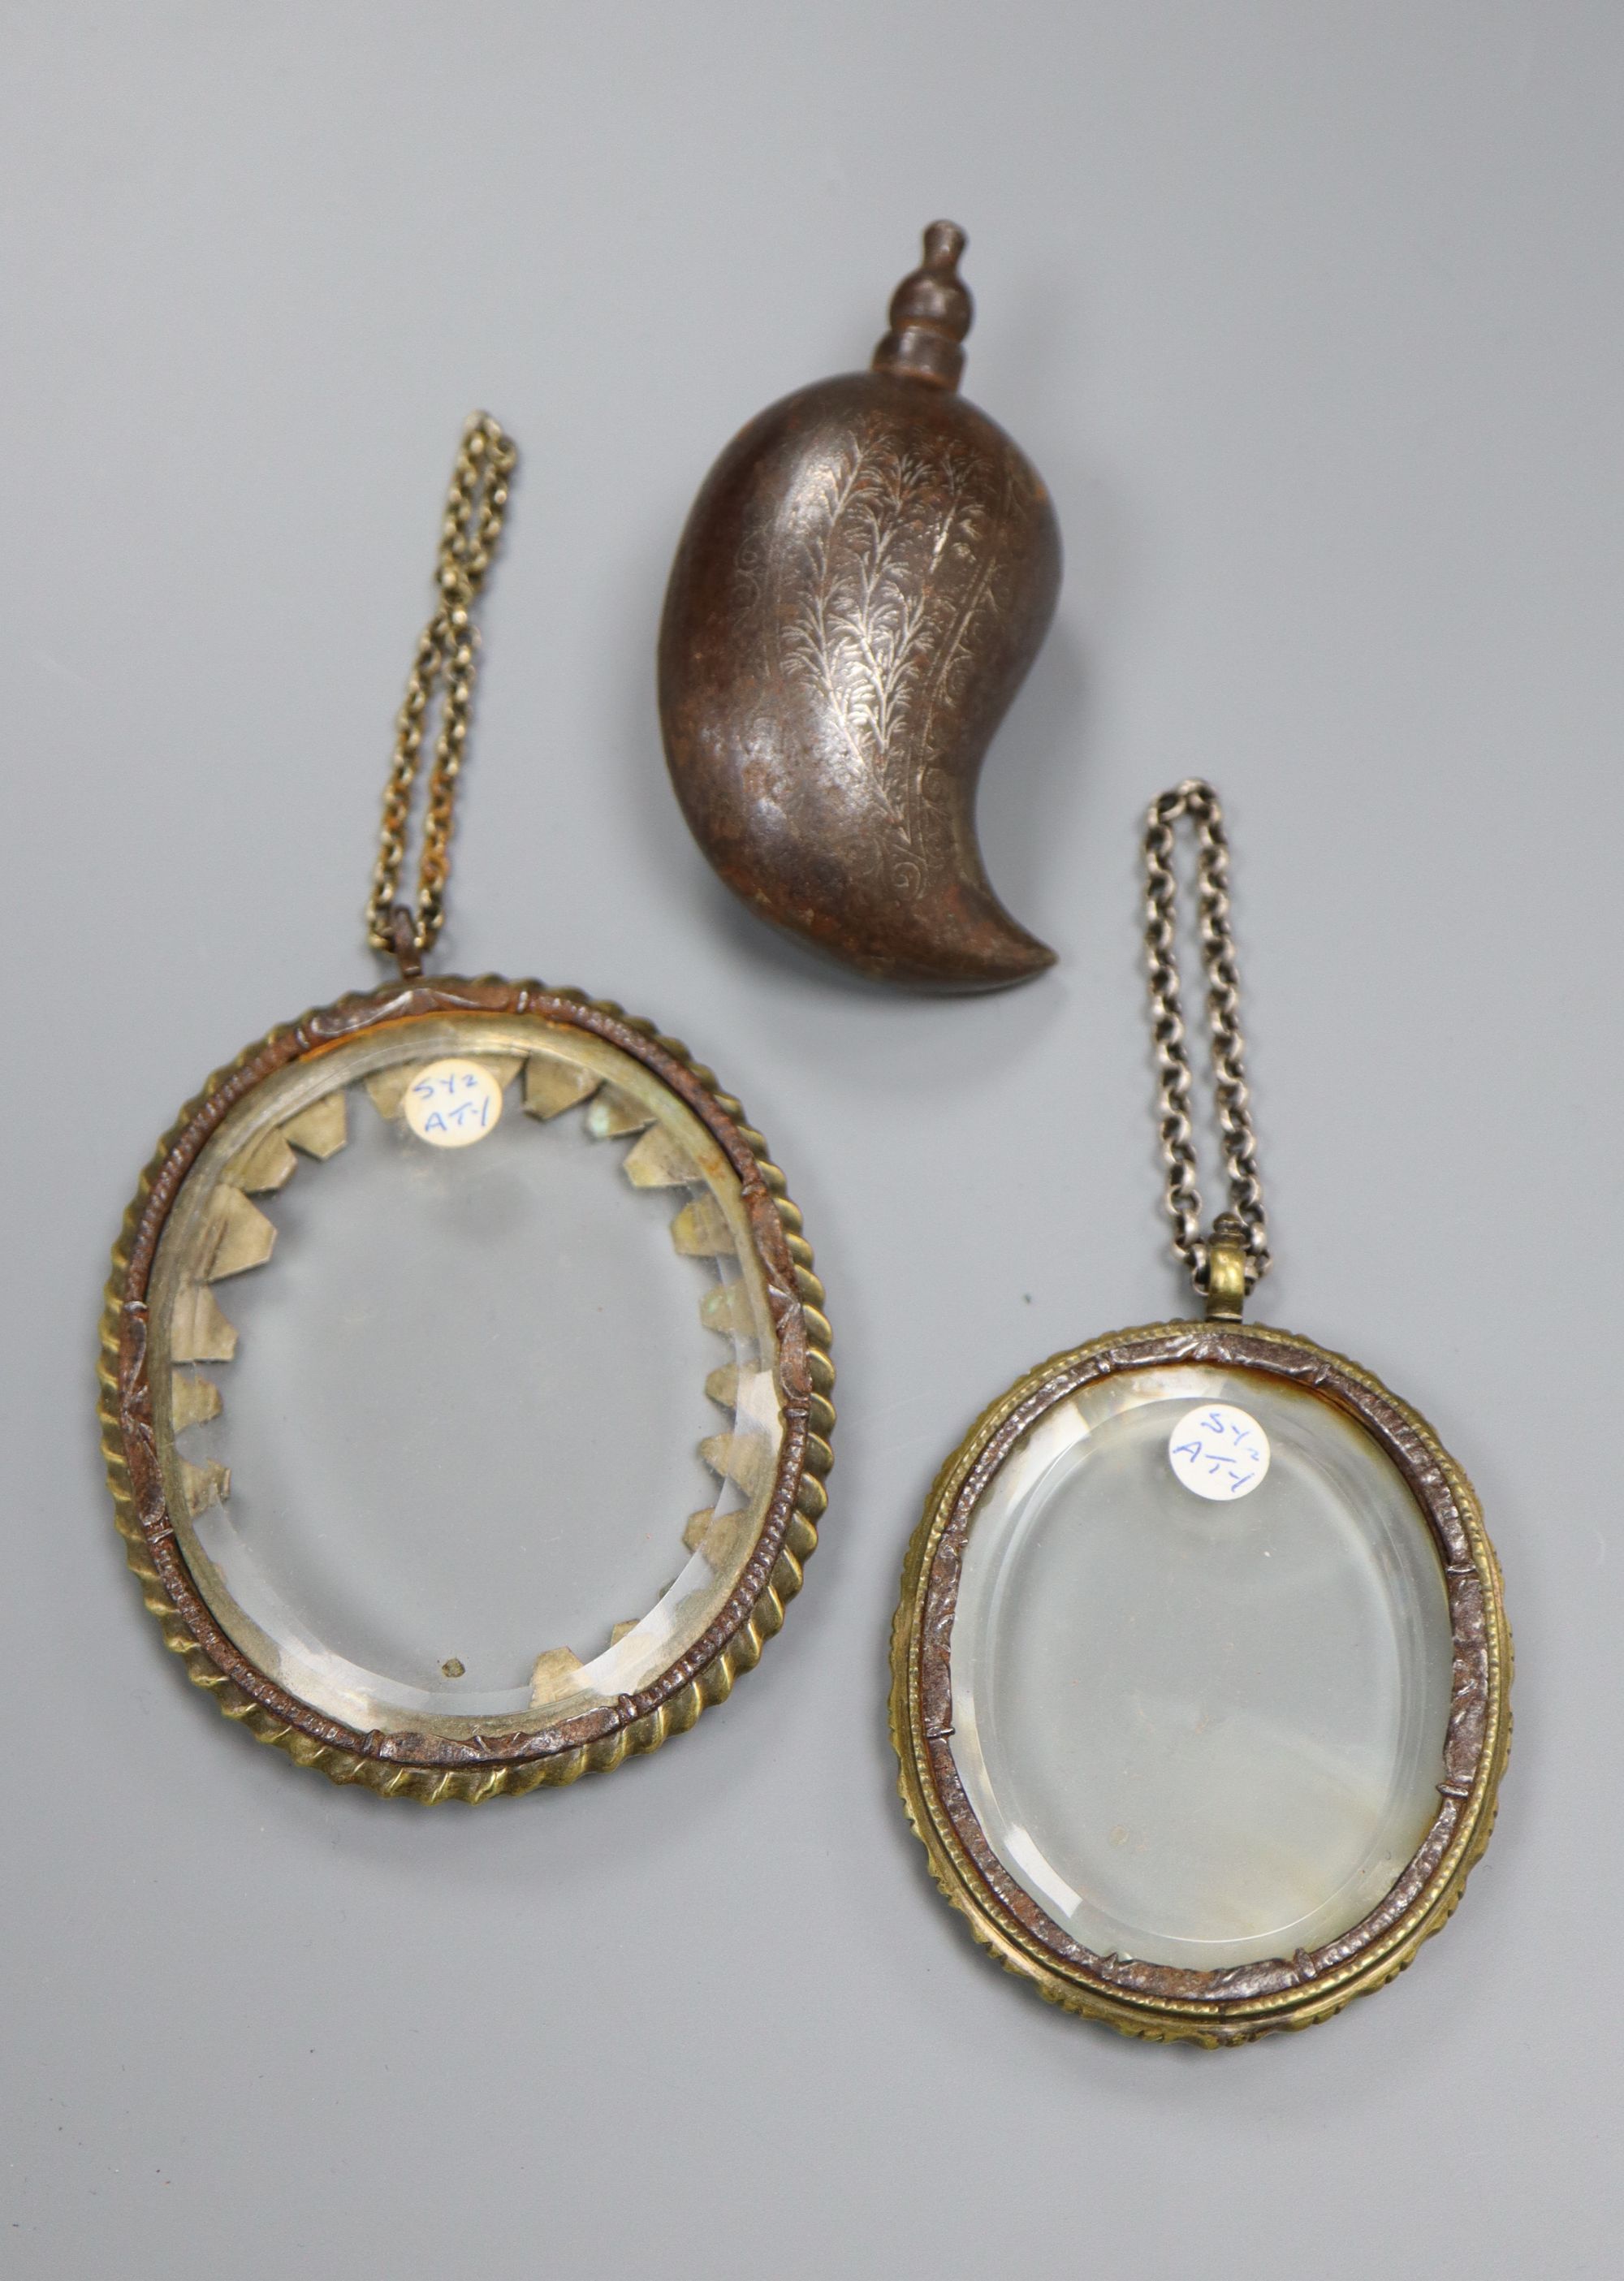 Two early miniature frames and a Bidri ware scent bottle